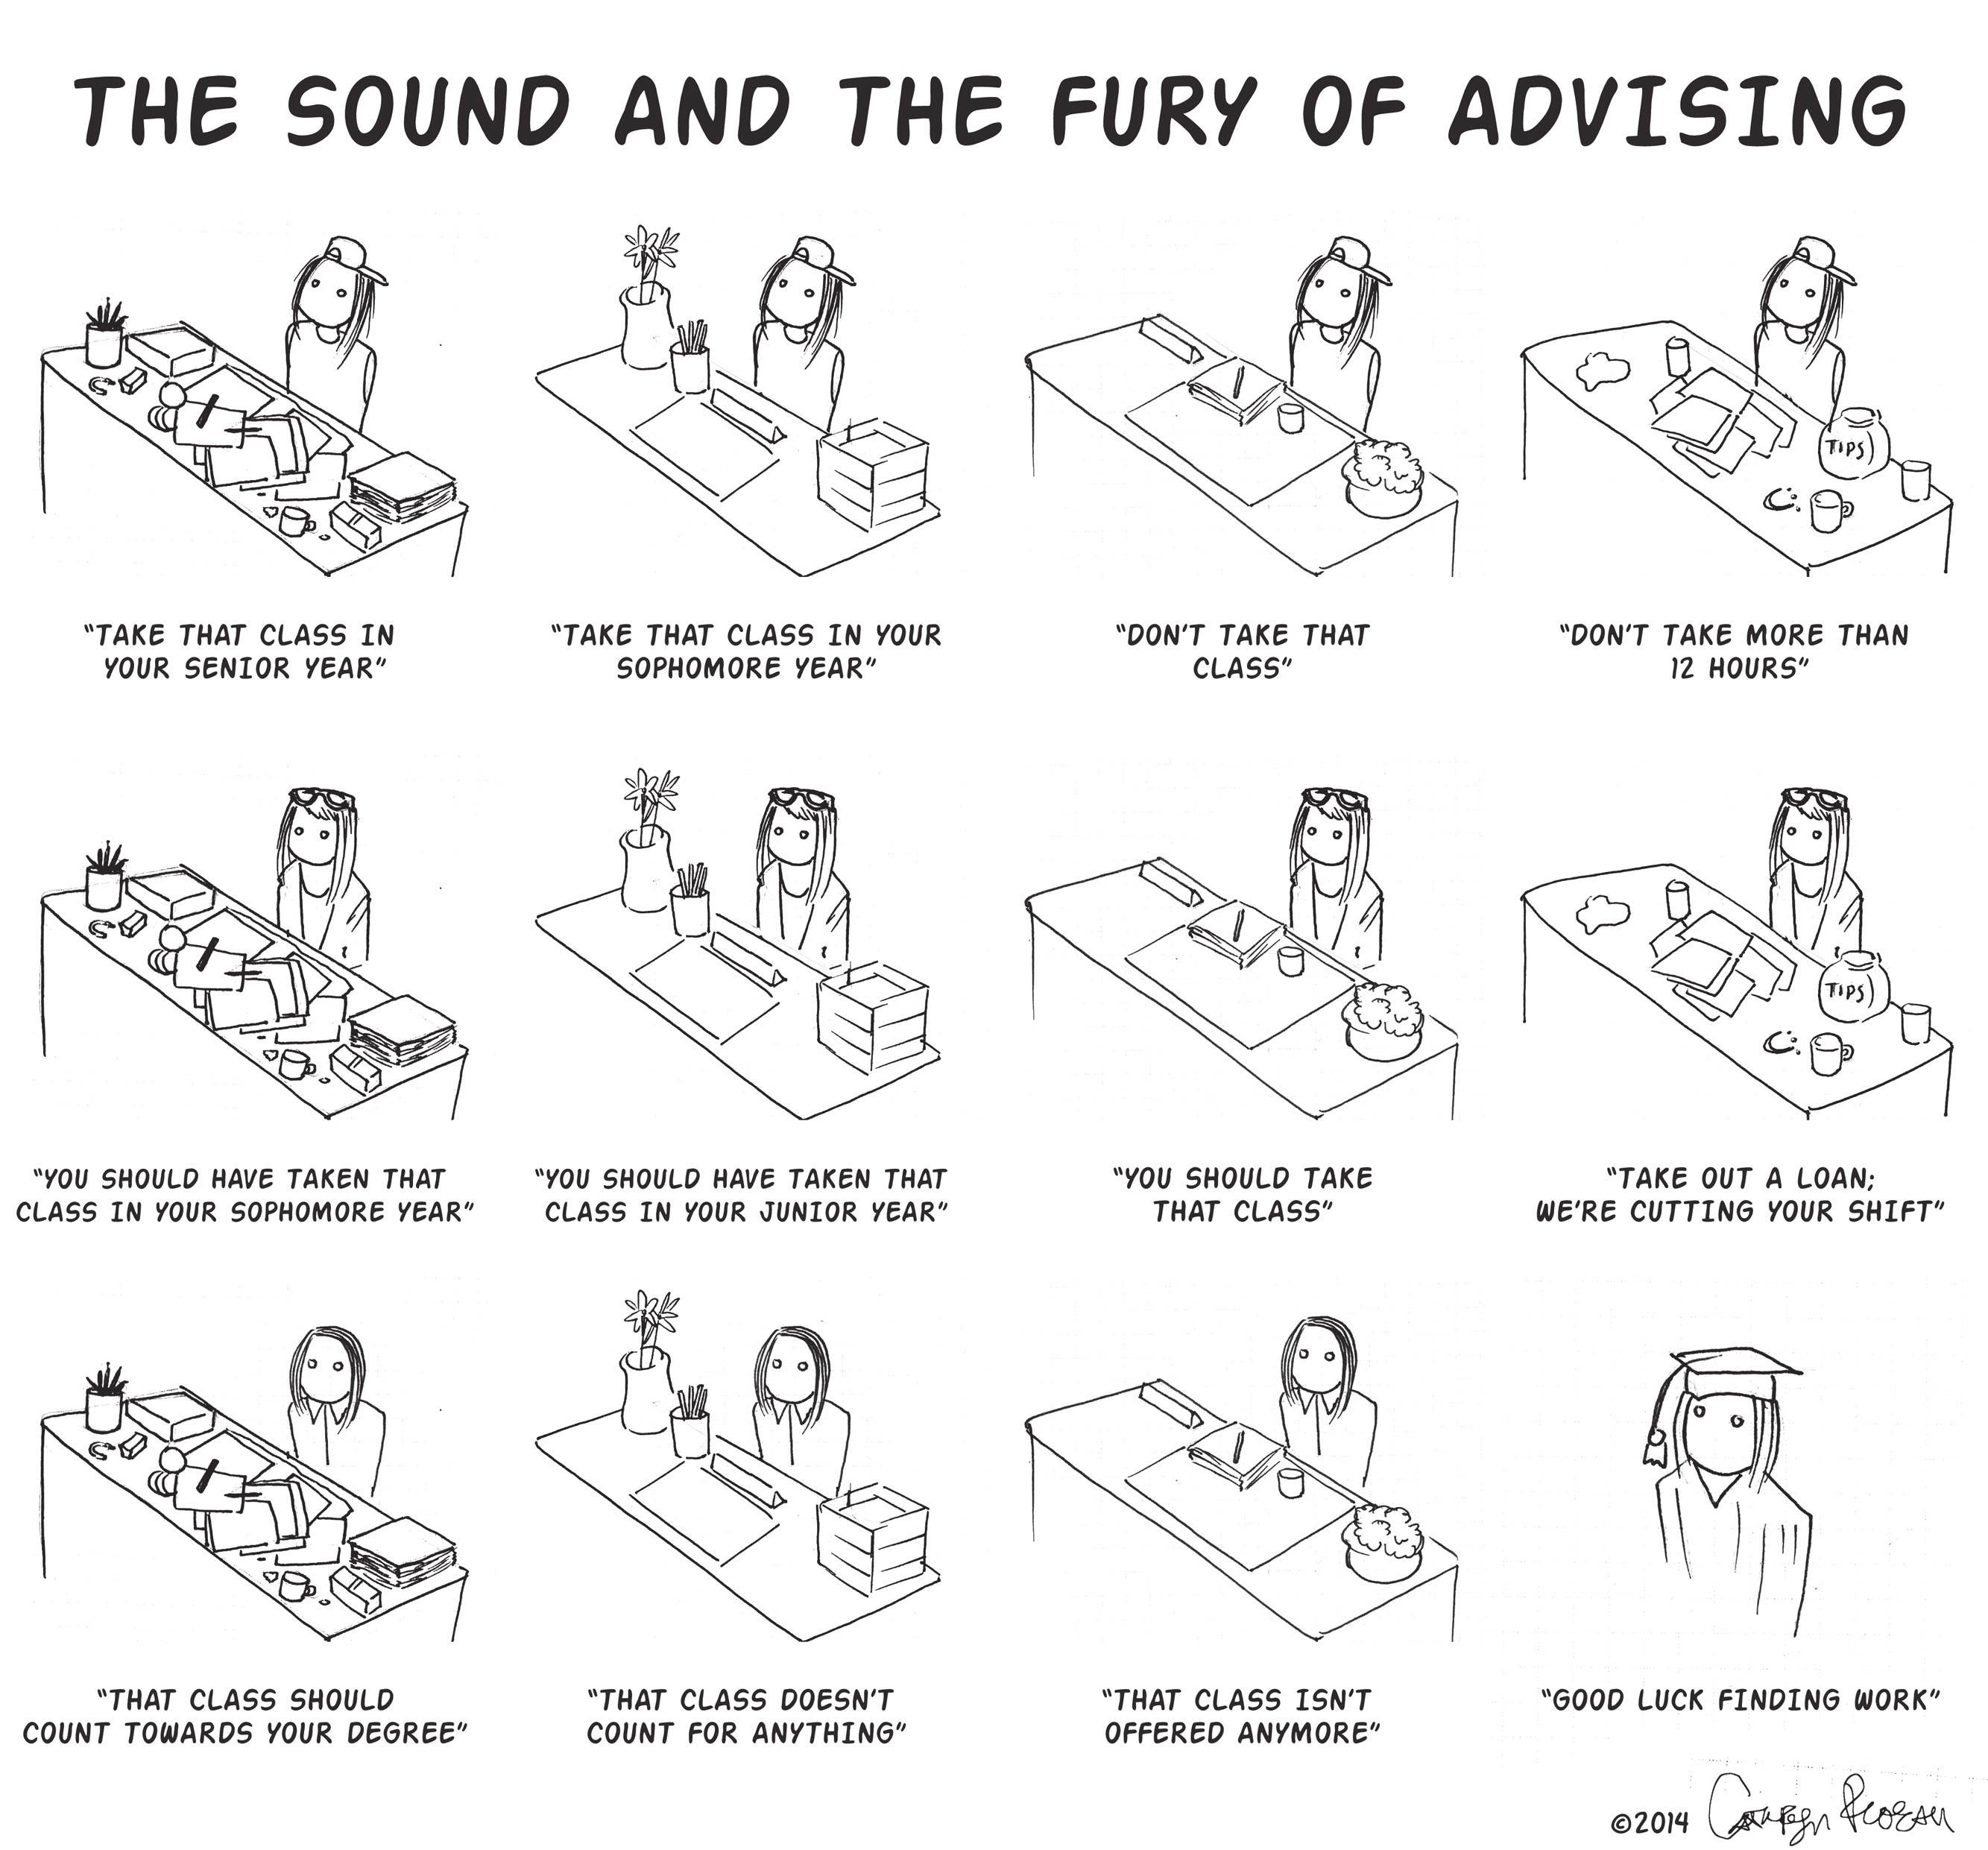 The sound and fury of advising